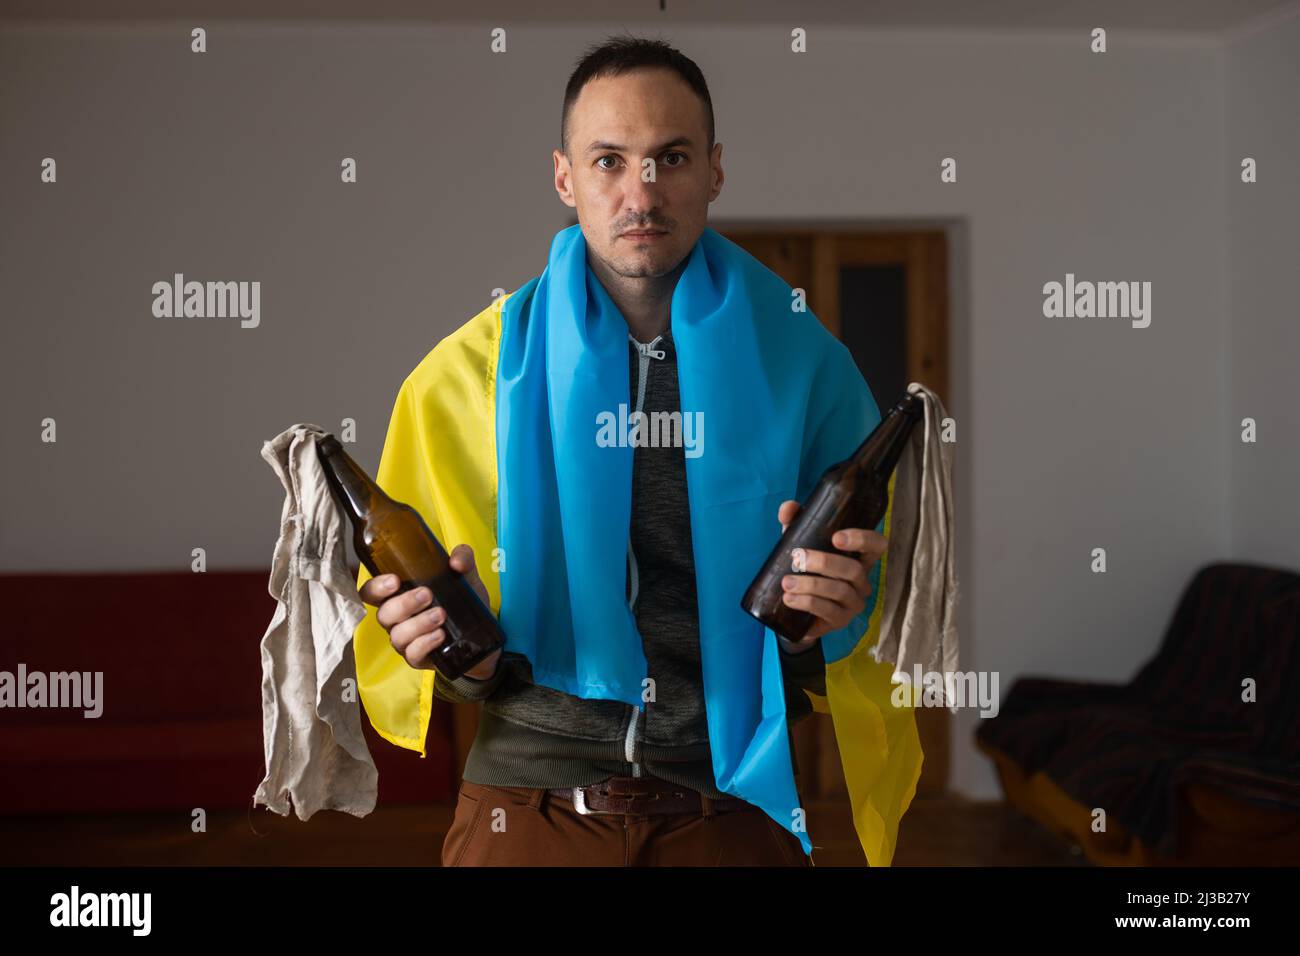 man with flag of ukraine with molotov cocktail in room Stock Photo